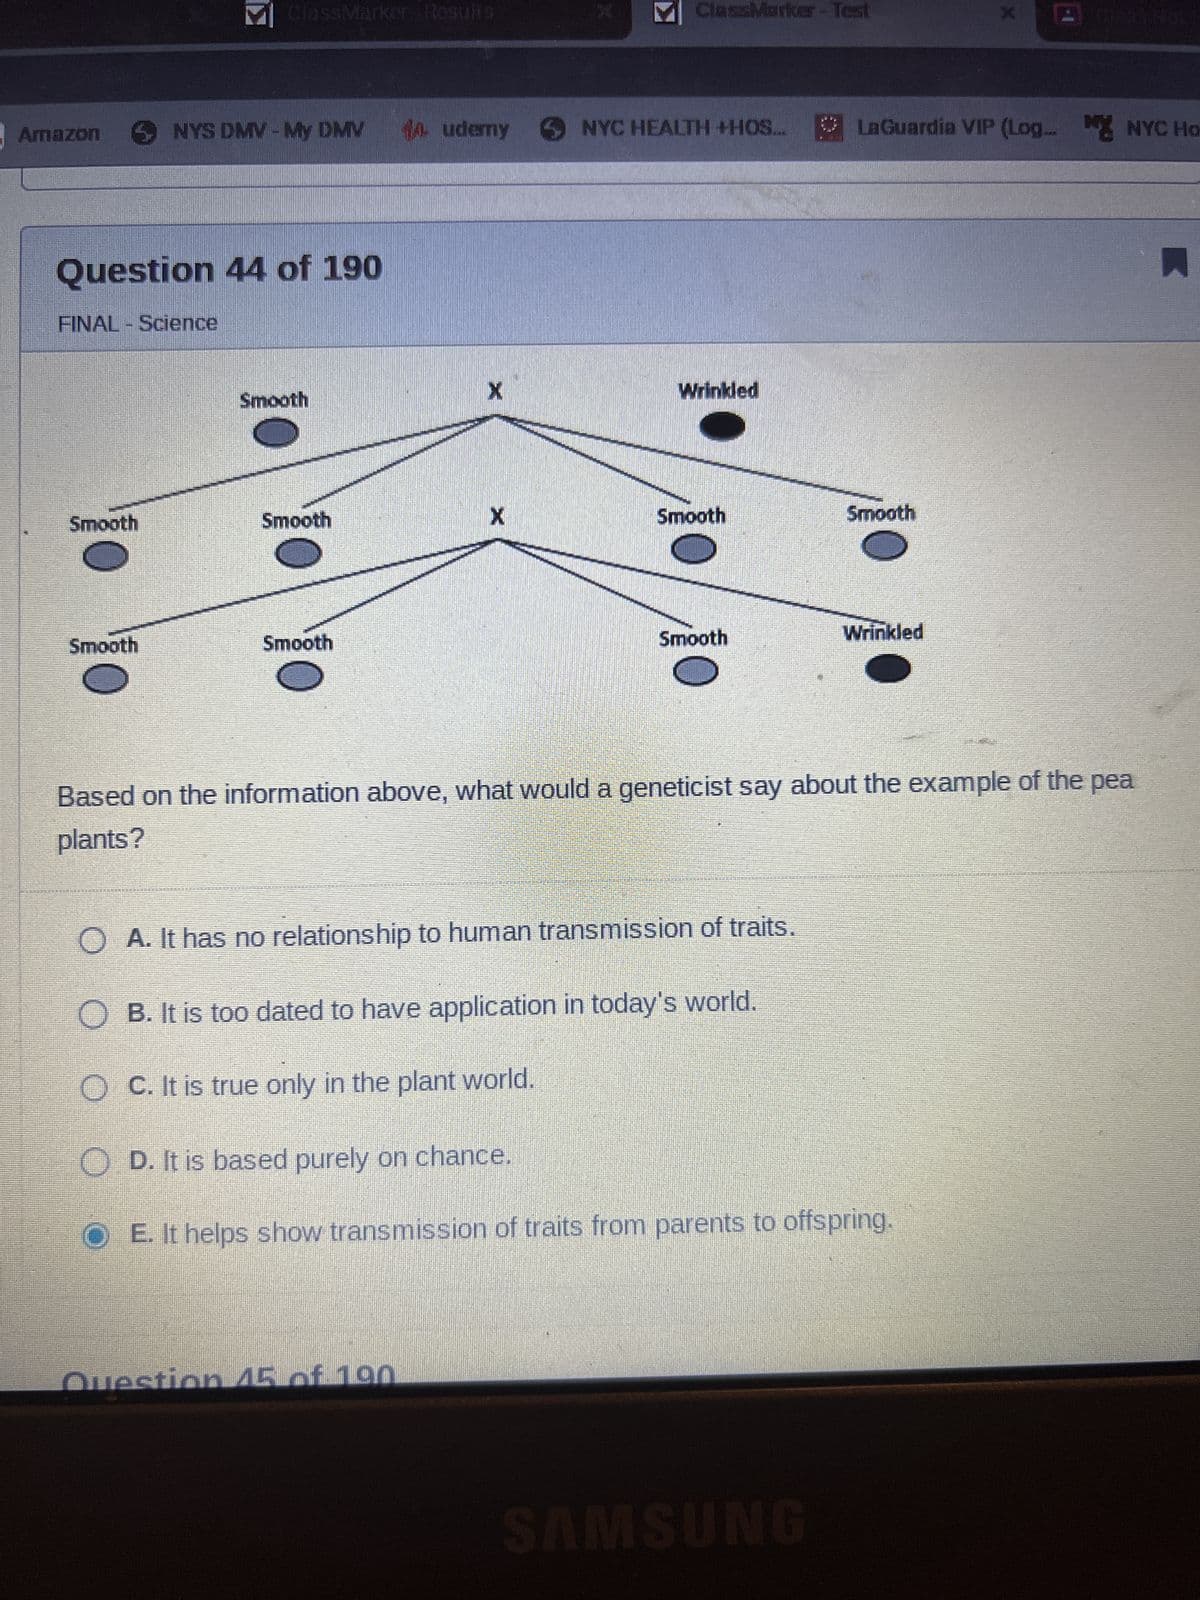 Amazon
Smooth
ClassMarkor-Rosults
Question 44 of 190
FINAL - Science
Smooth
NYS DMV - My DMV
Smooth
Smooth
Smooth
14 udemy
X
Question 15 of 190
ClassMarker - Test
NYC HEALTH +HOS...
Wrinkled
Smooth
Smooth
My
LaGuardia VIP (Log... NYC Ho
Smooth
SAMSUNG
Wrinkled
Based on the information above, what would a geneticist say about the example of the pea
plants?
O A. It has no relationship to human transmission of traits.
O B. It is too dated to have application in today's world.
O C. It is true only in the plant world.
O. D. It is based purely on chance.
OE. It helps show transmission of traits from parents to offspring.
X